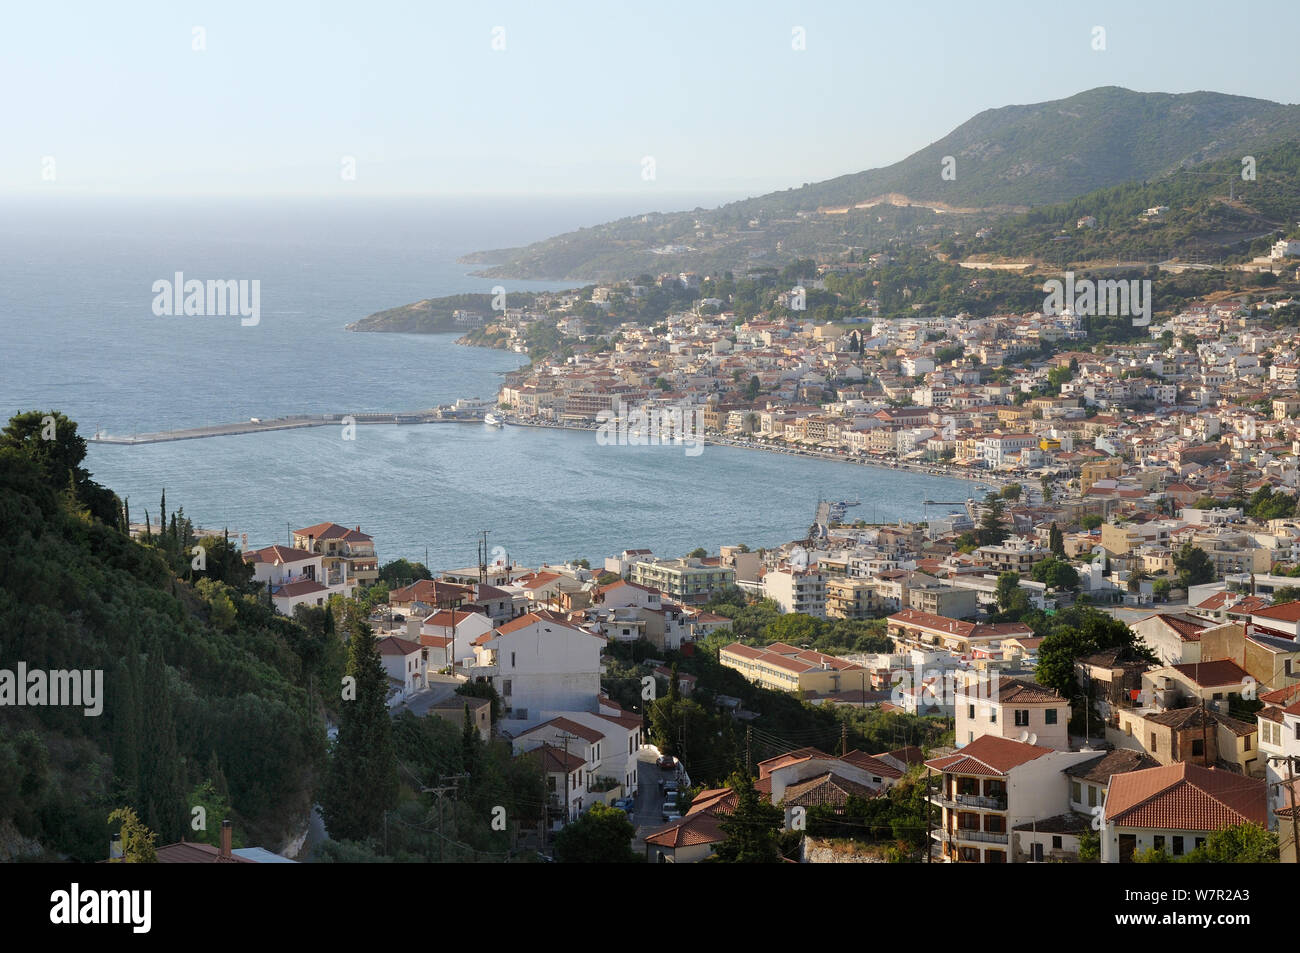 Overview of Samos harbour and town. Isle of Samos, Greece, August 2012. Stock Photo